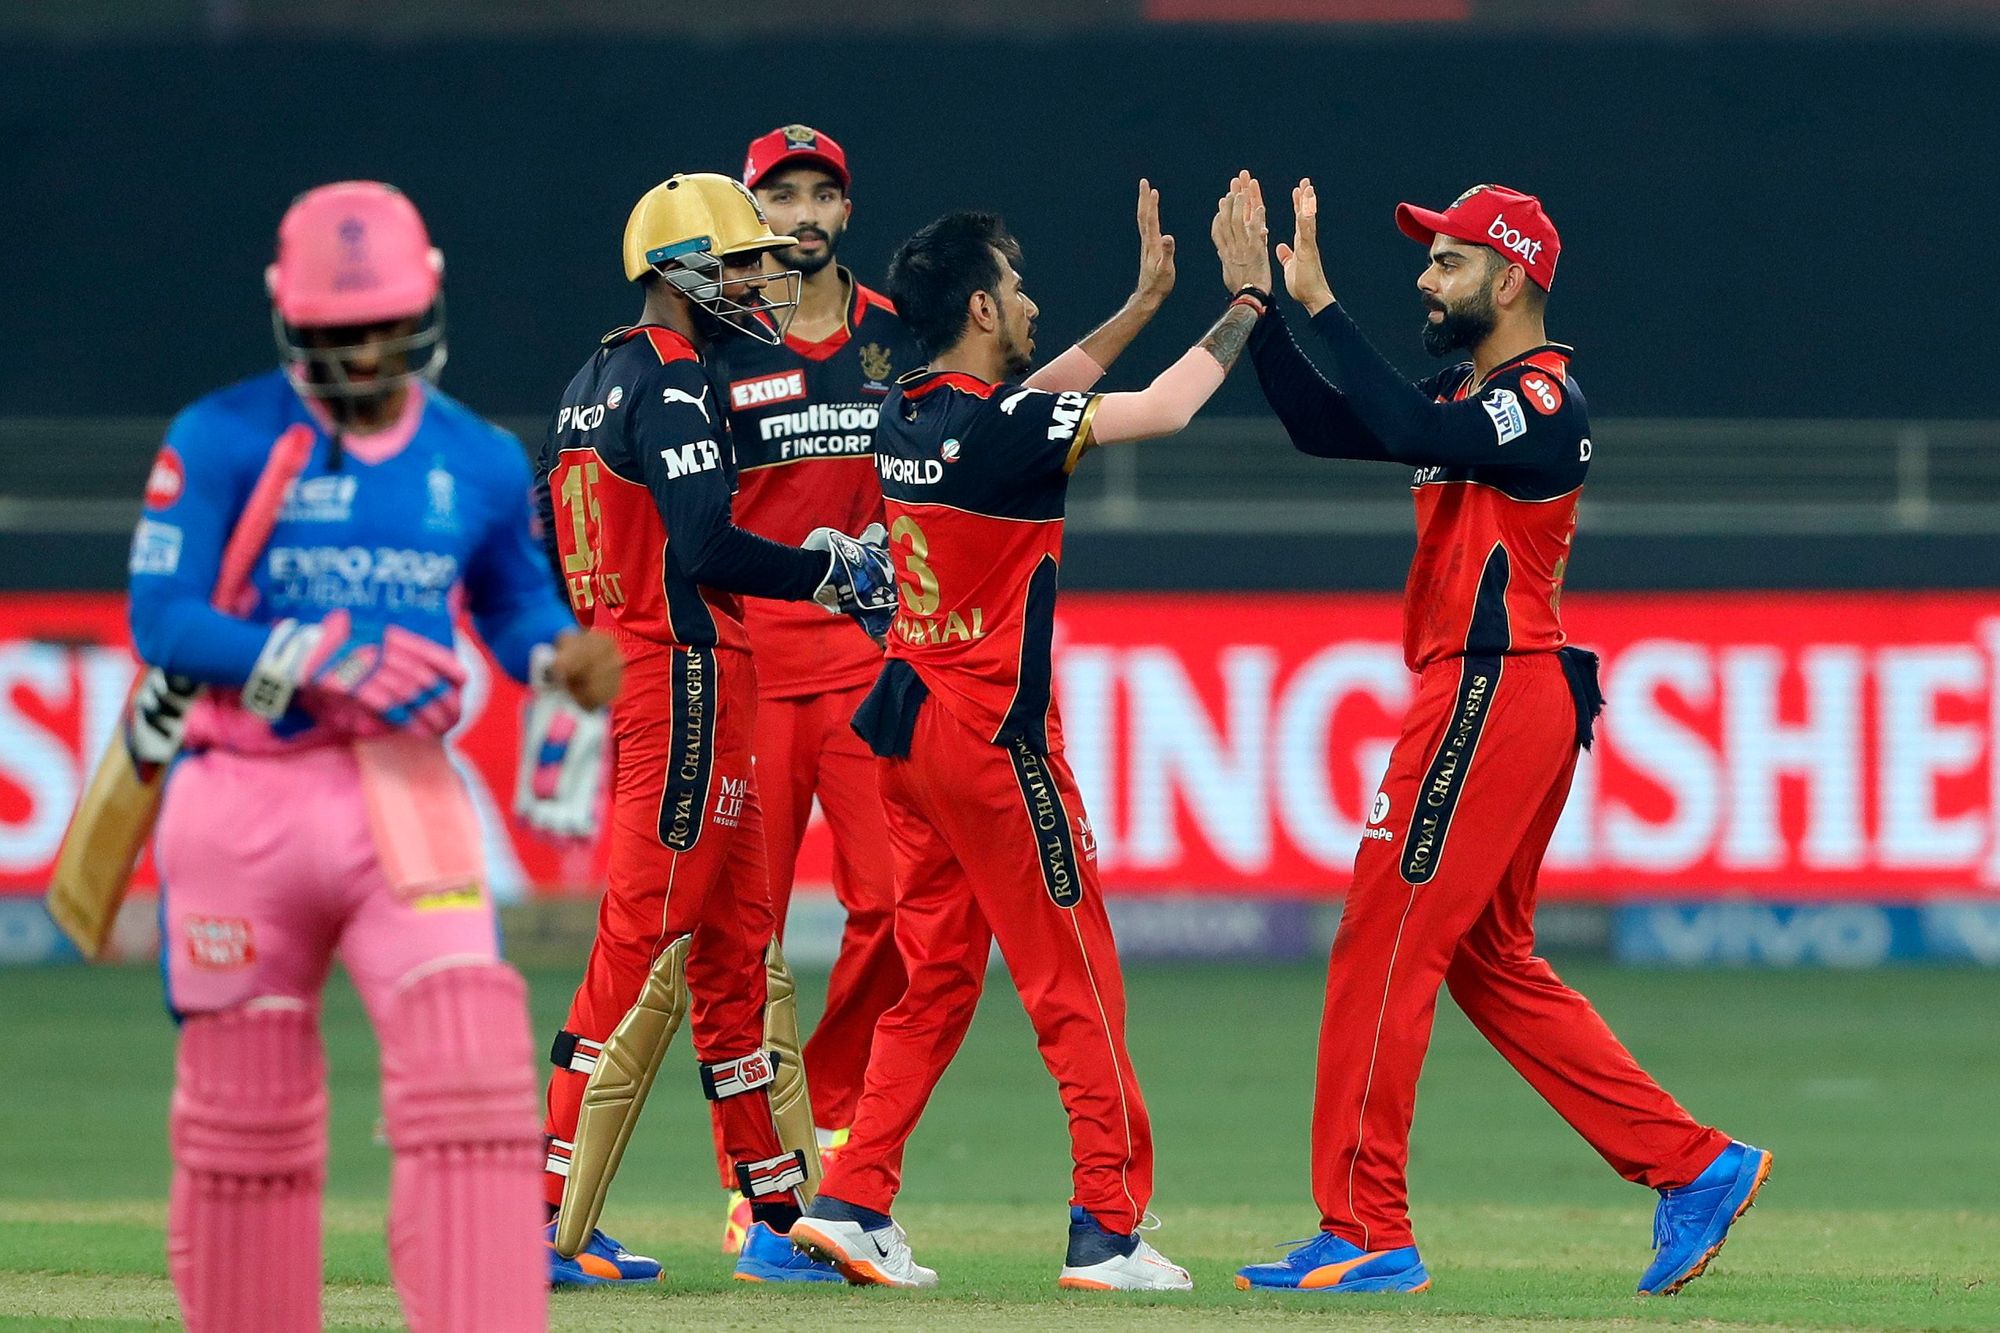 RCB beat RR by 7 wickets | BCCI/IPL